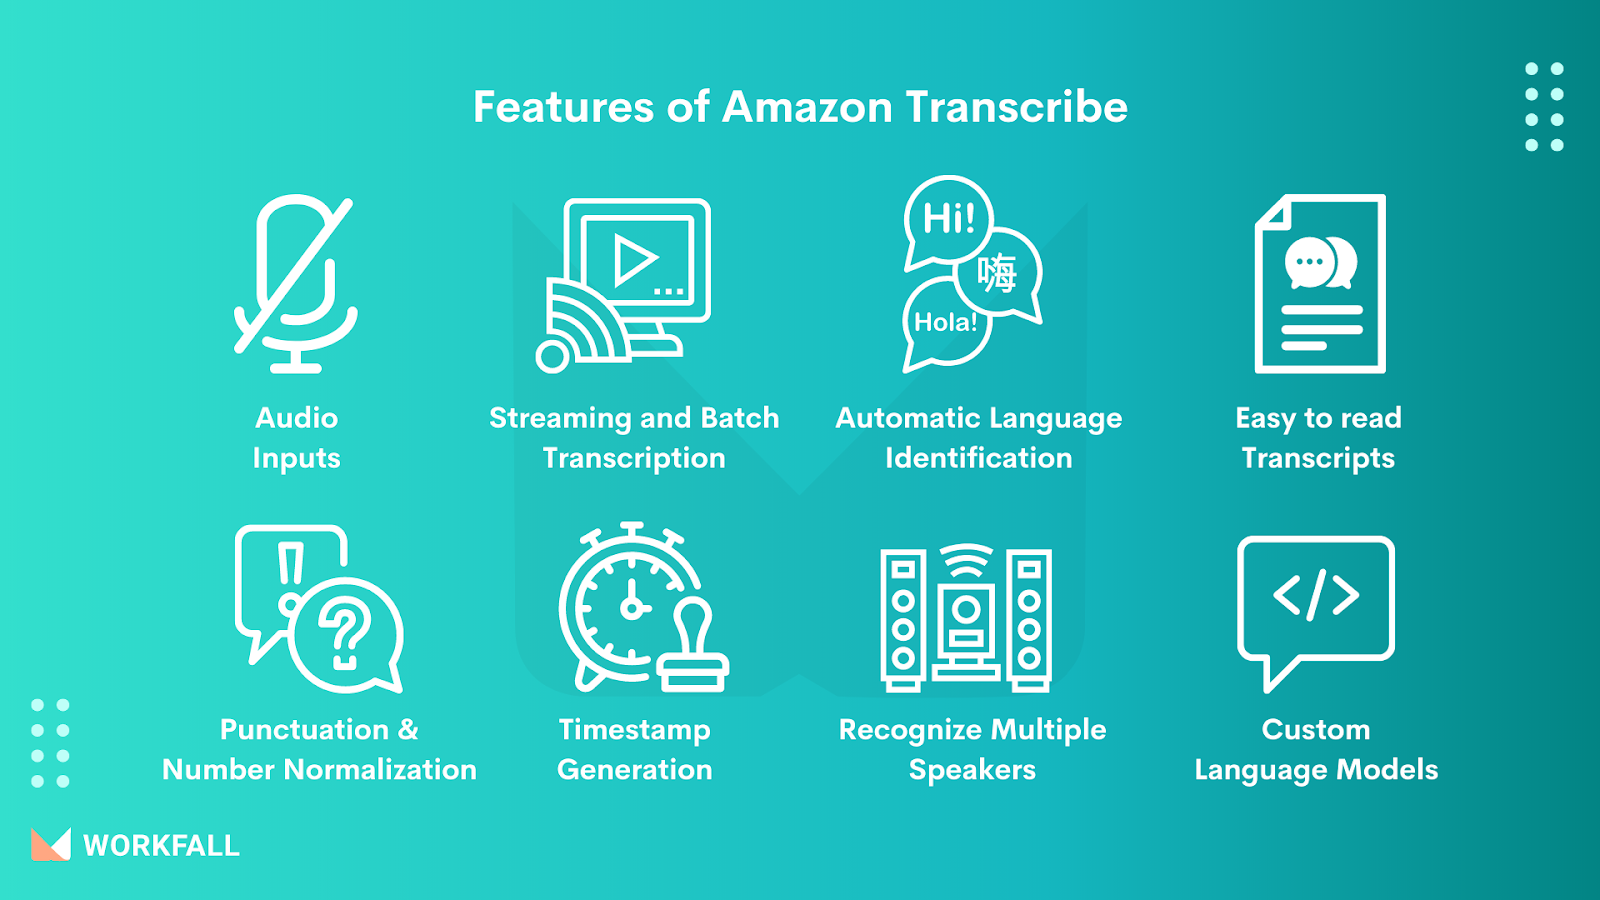 Features of Amazon Transcribe